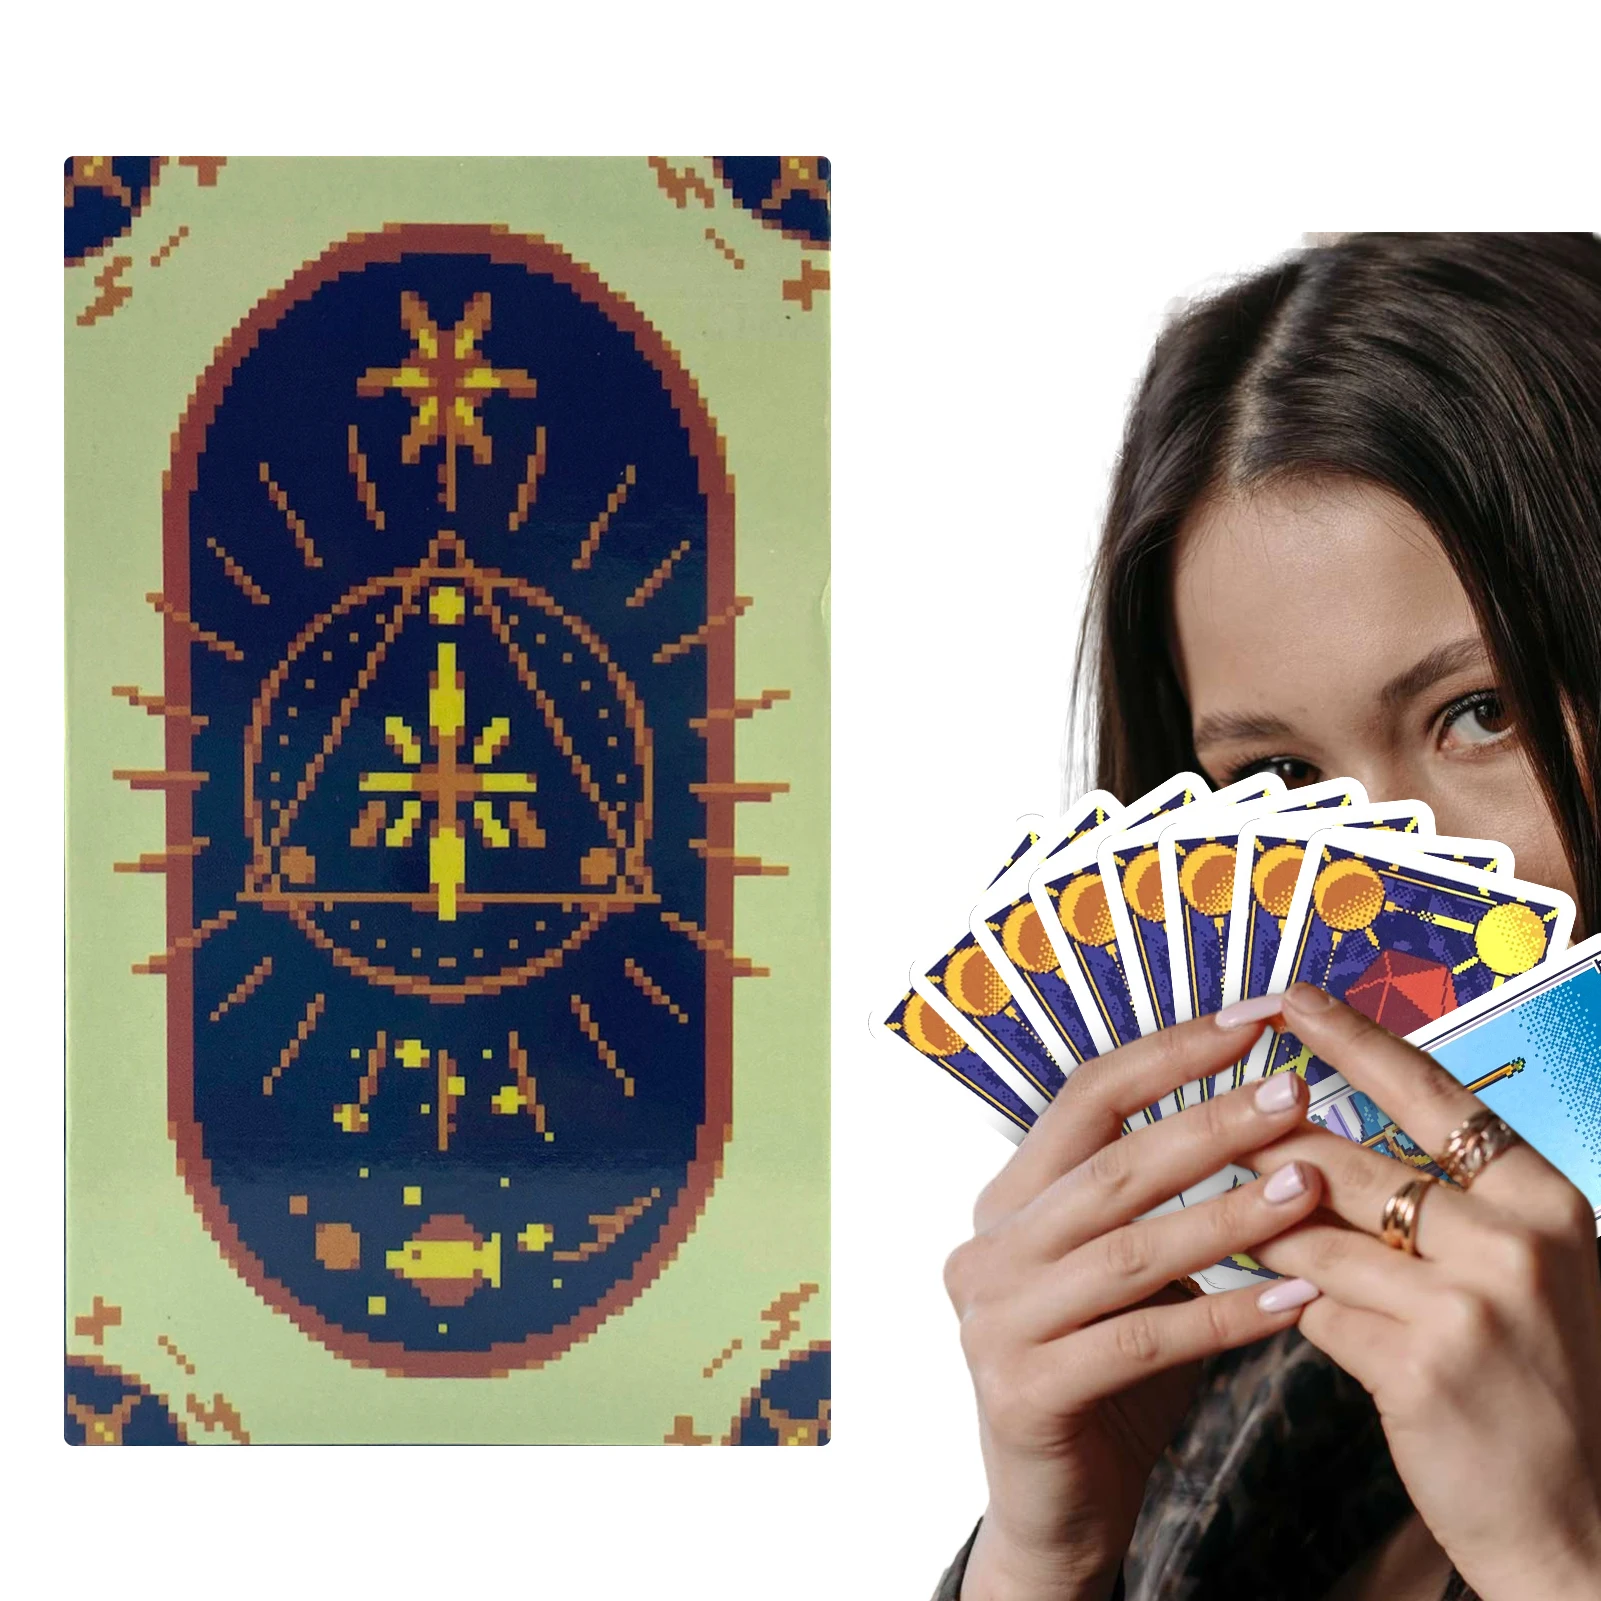 

Tarot Cards Full English Tarot Card For Fate Divination Tarot Deck Family Party Board Game Beginner Fortune Telling Game